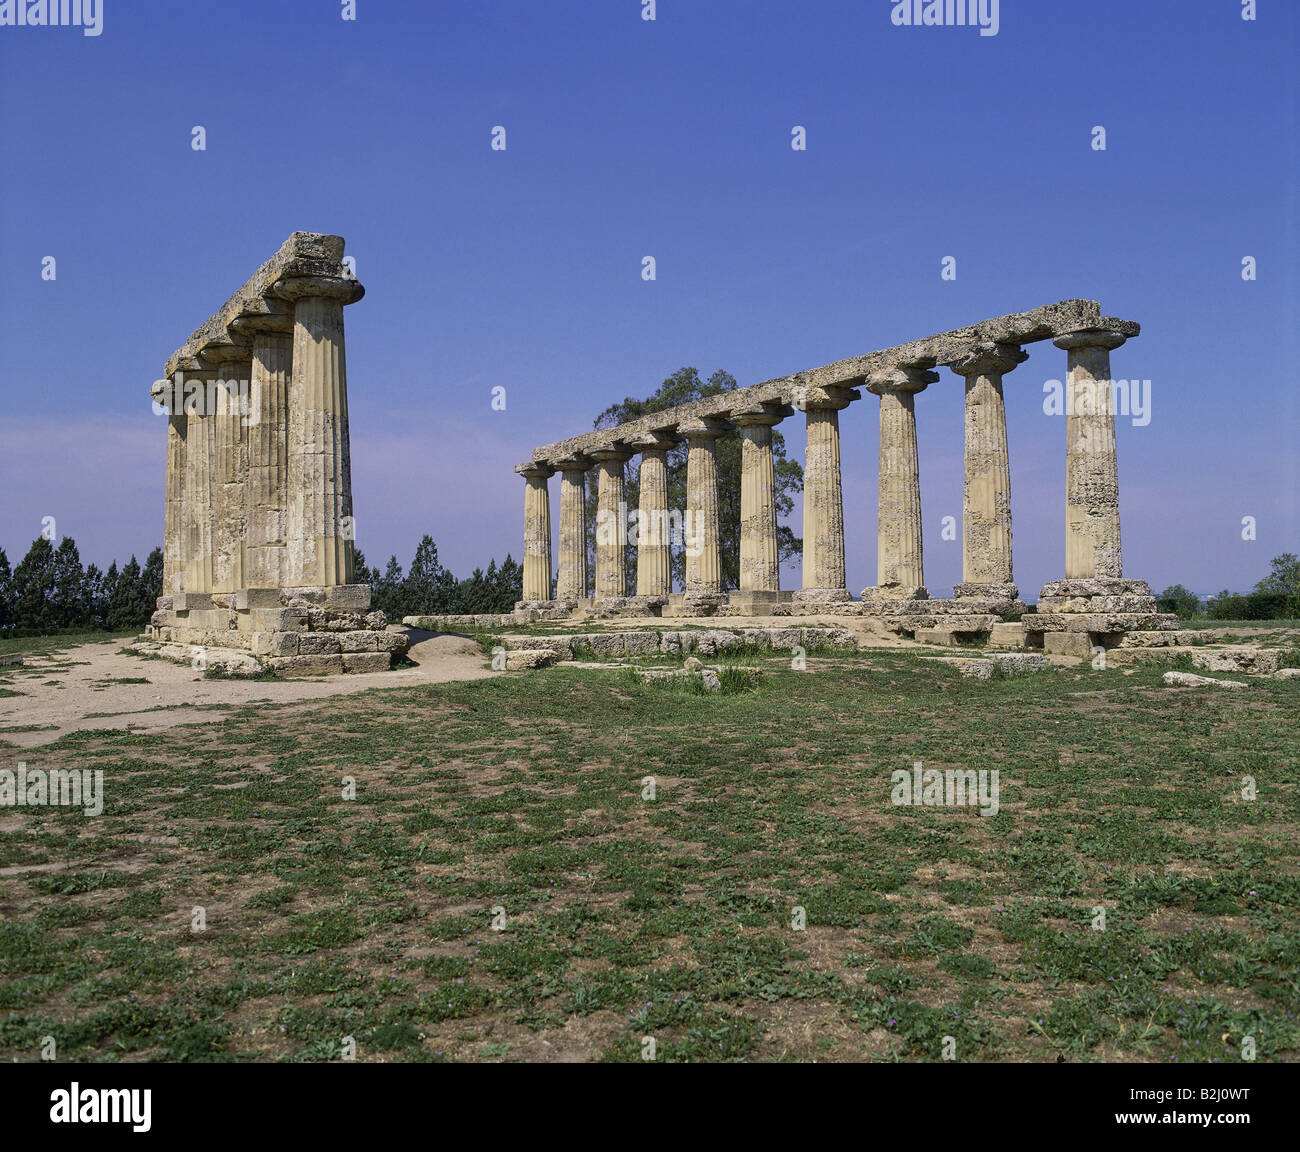 geography / travel, Italy, Metaponto, Table of Paladine, remains, Dorian temple, 6th century BC ruin, archaeology, ancient, colu Stock Photo